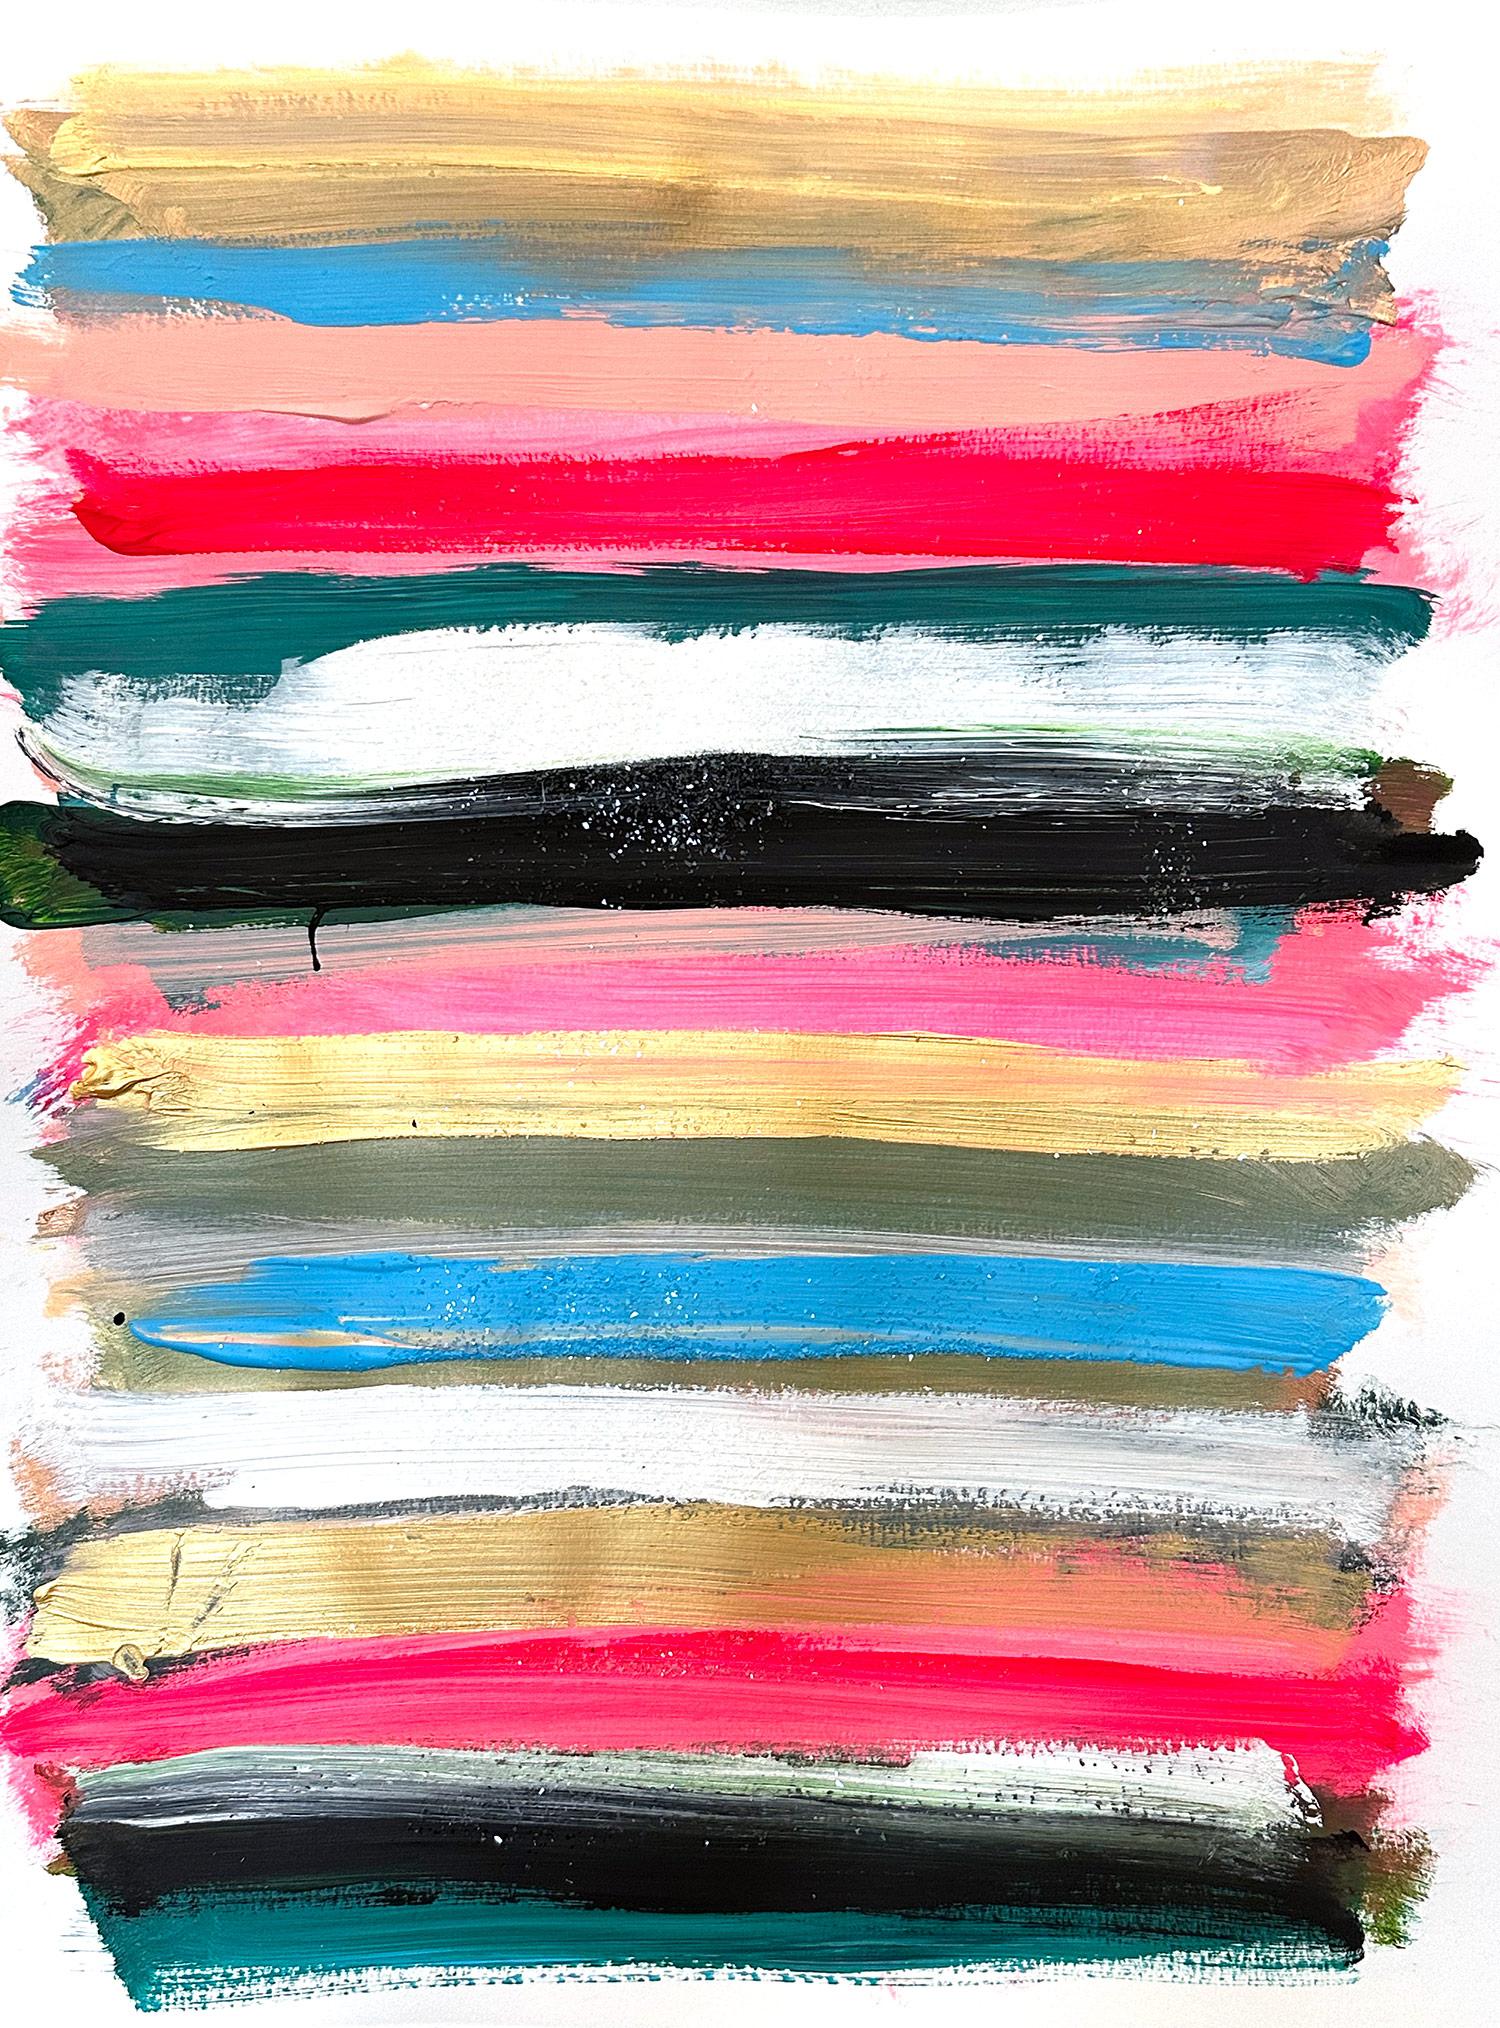 "My Horizon - Hamptons Cocktail Party" Color Field Contemporary Painting Paper